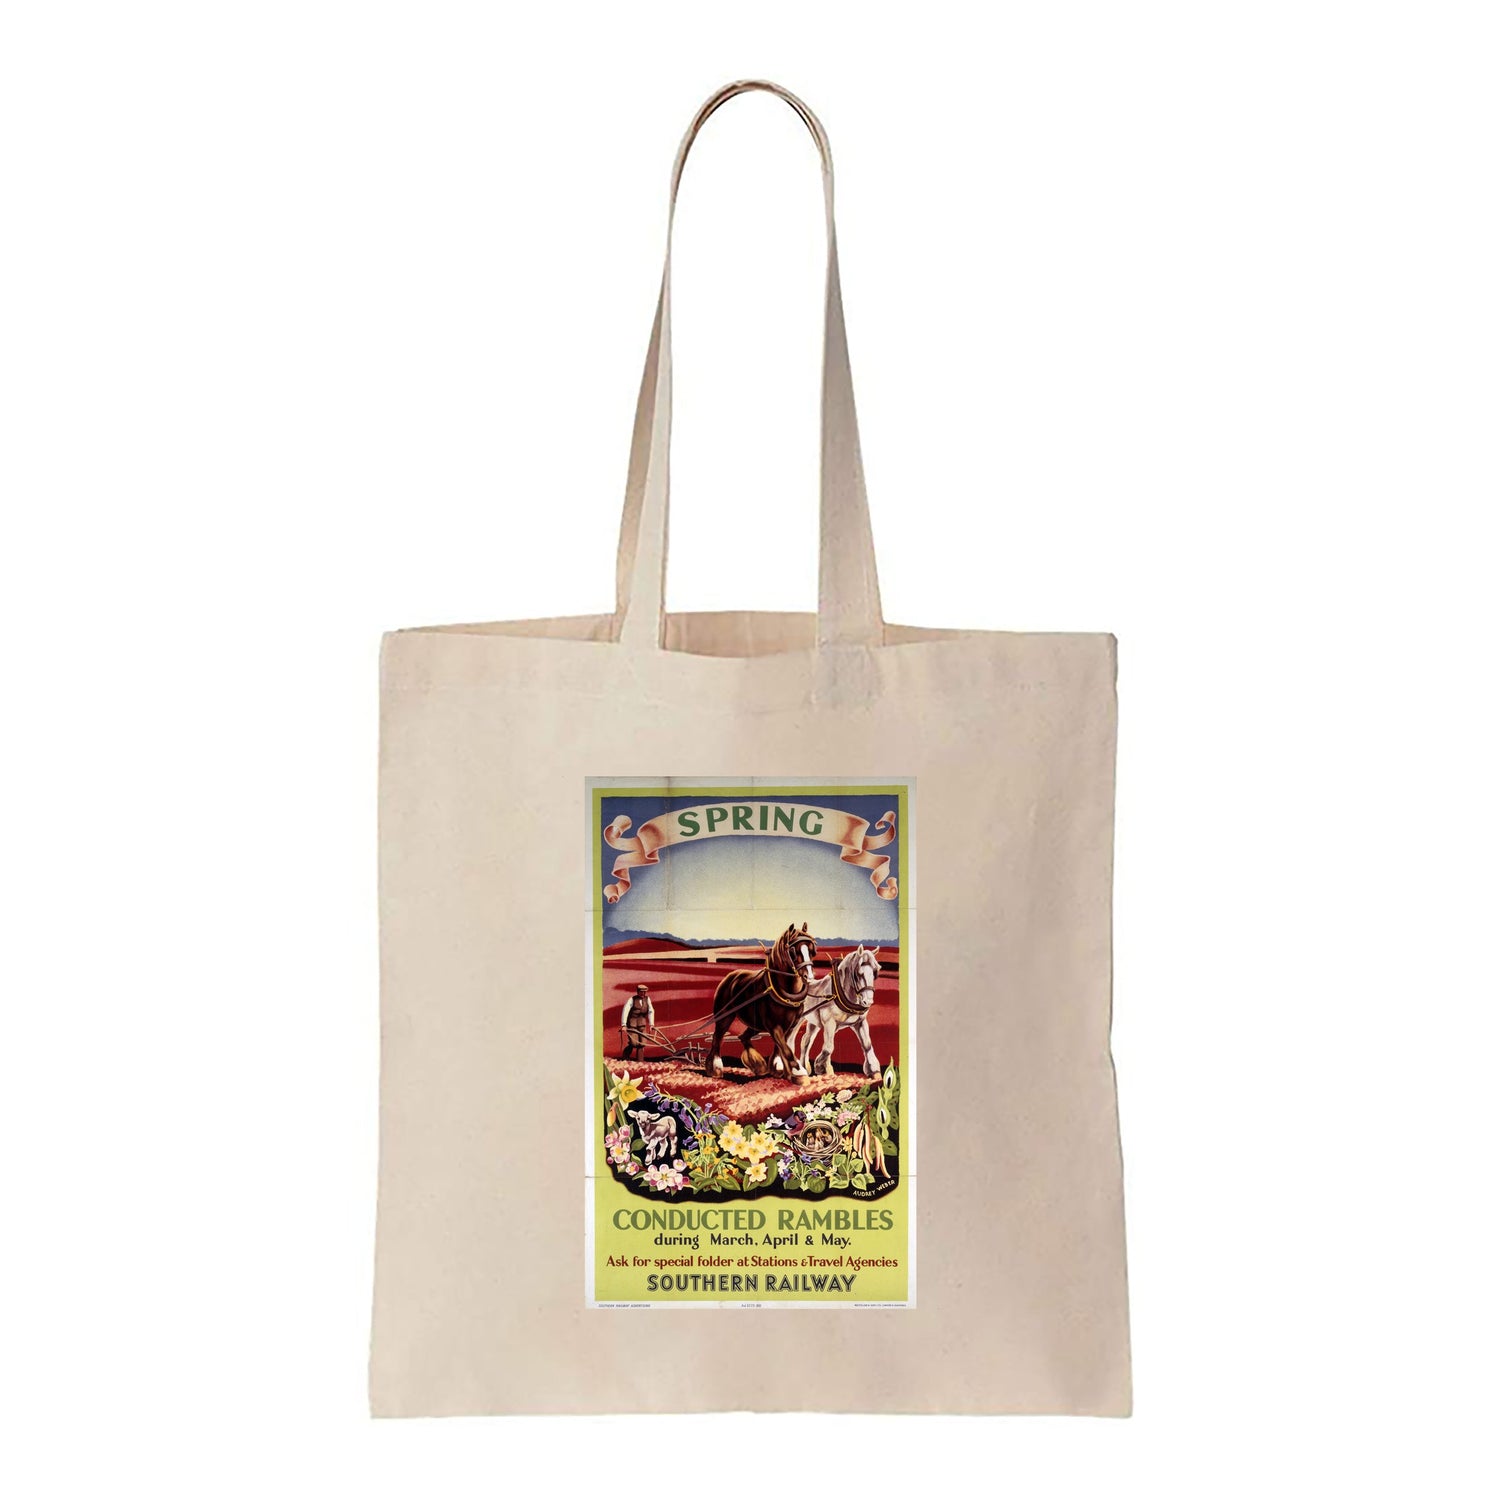 Spring - Conducted Rambles - Canvas Tote Bag